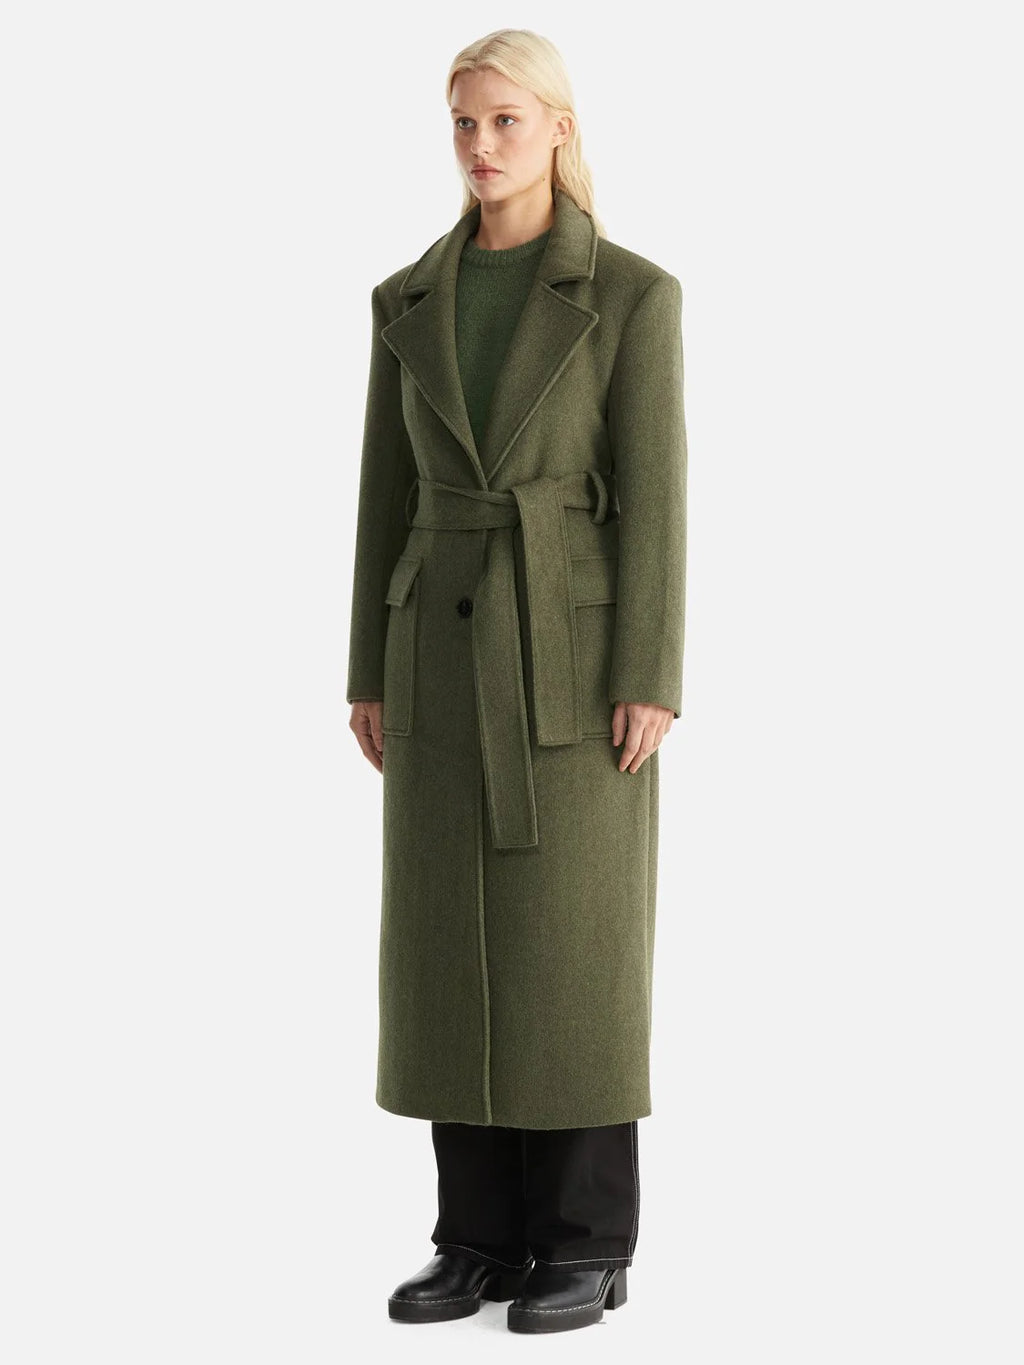 ENA PELLY - Madison Wool Coat - Forest